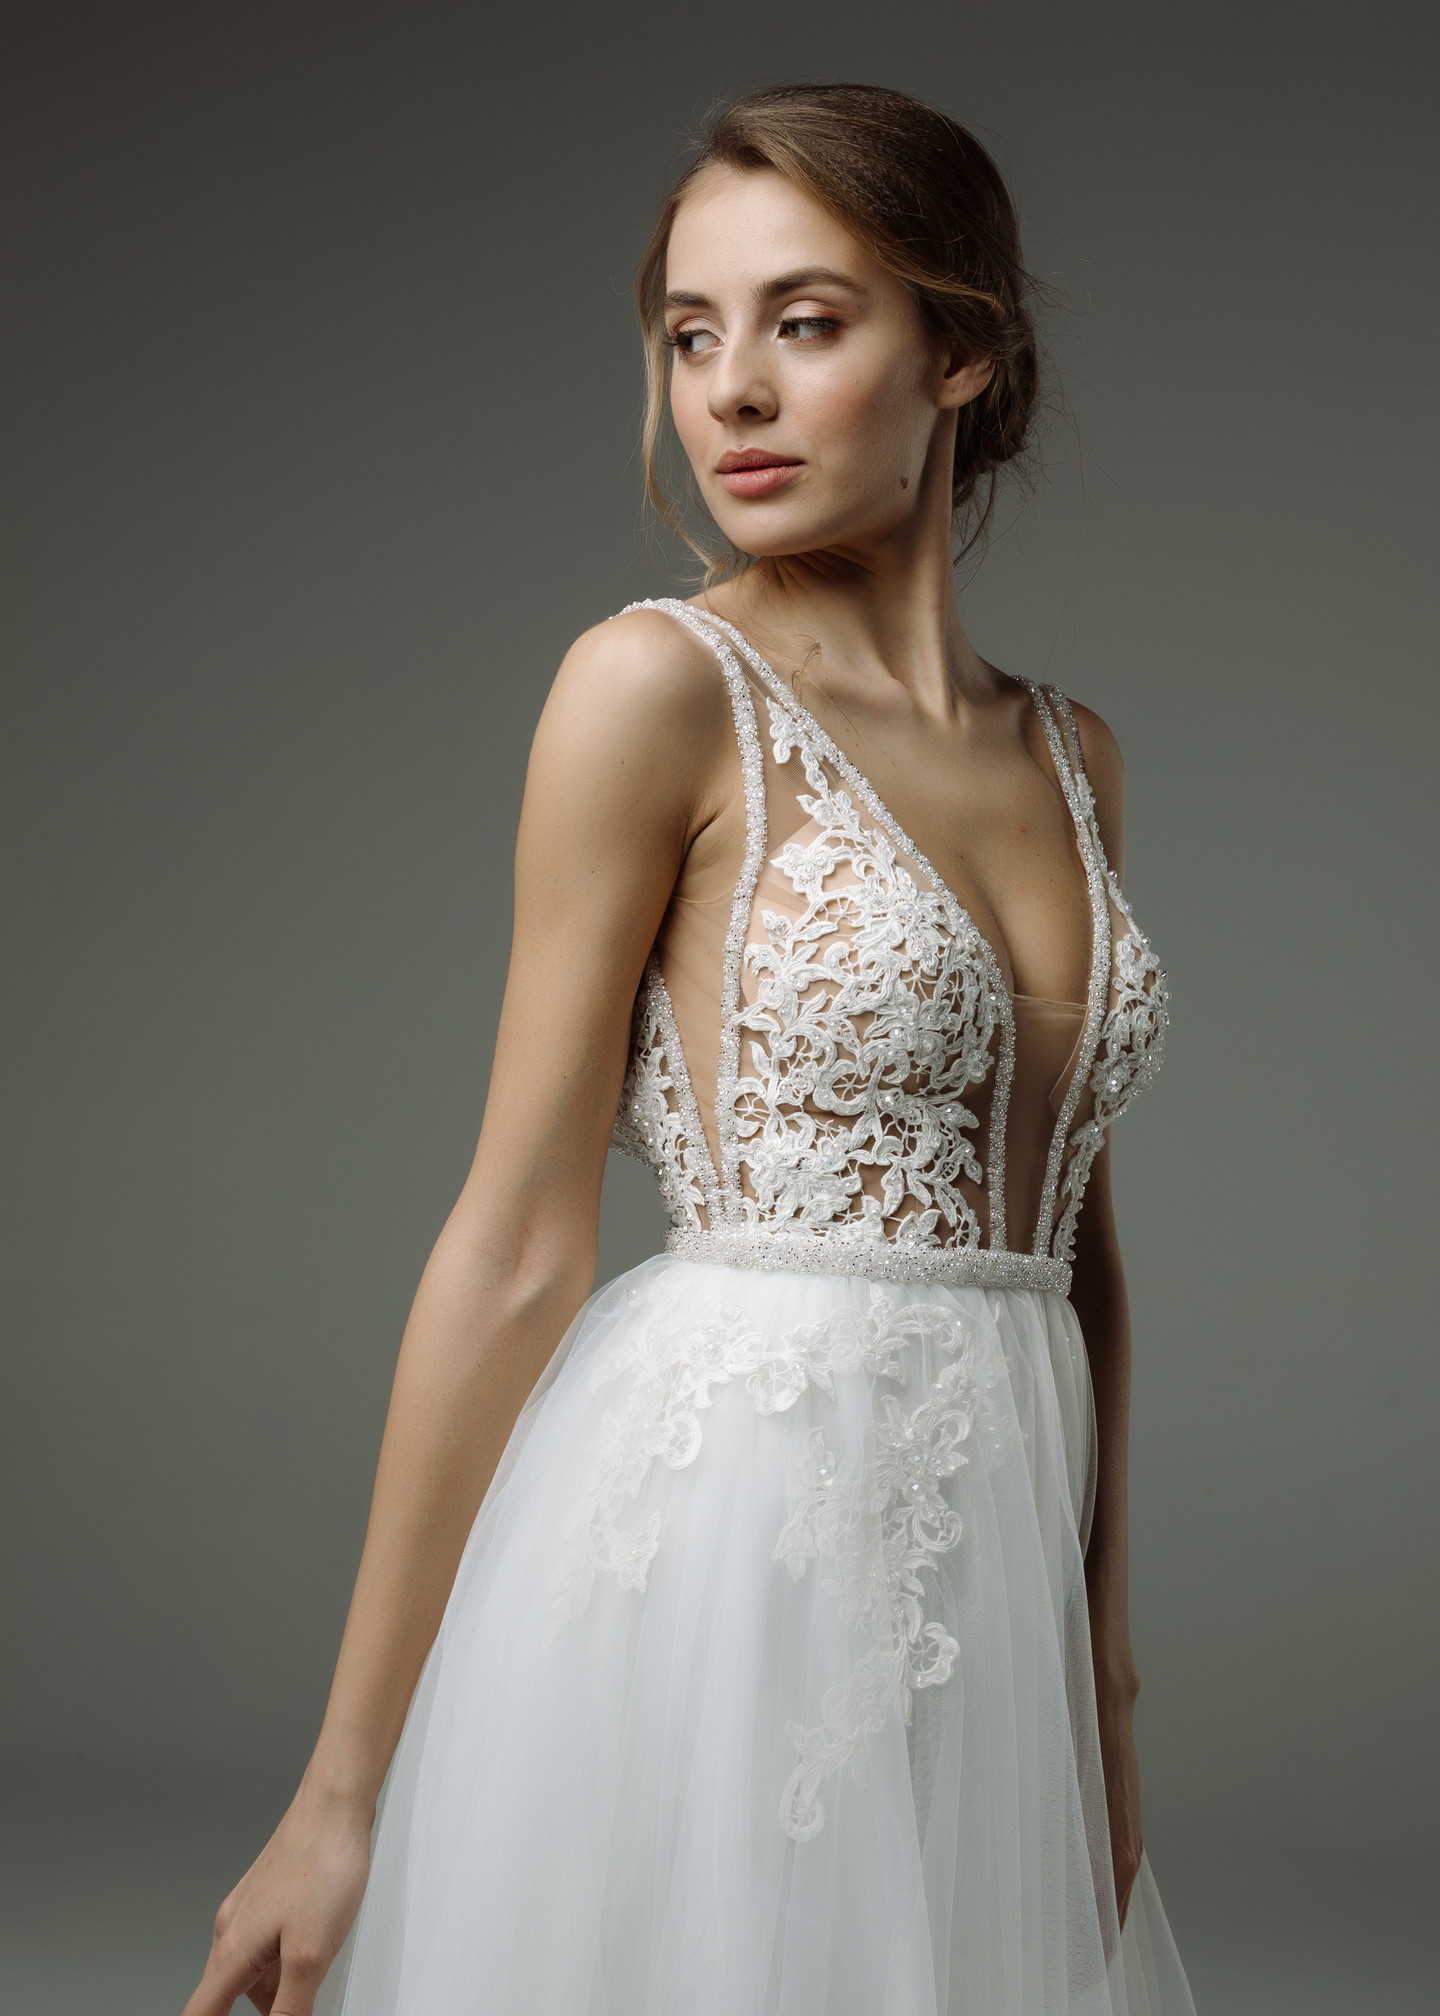 Sylvian gown, 2019, couture, dress, bridal, off-white, lace, A-line, tulle, popular